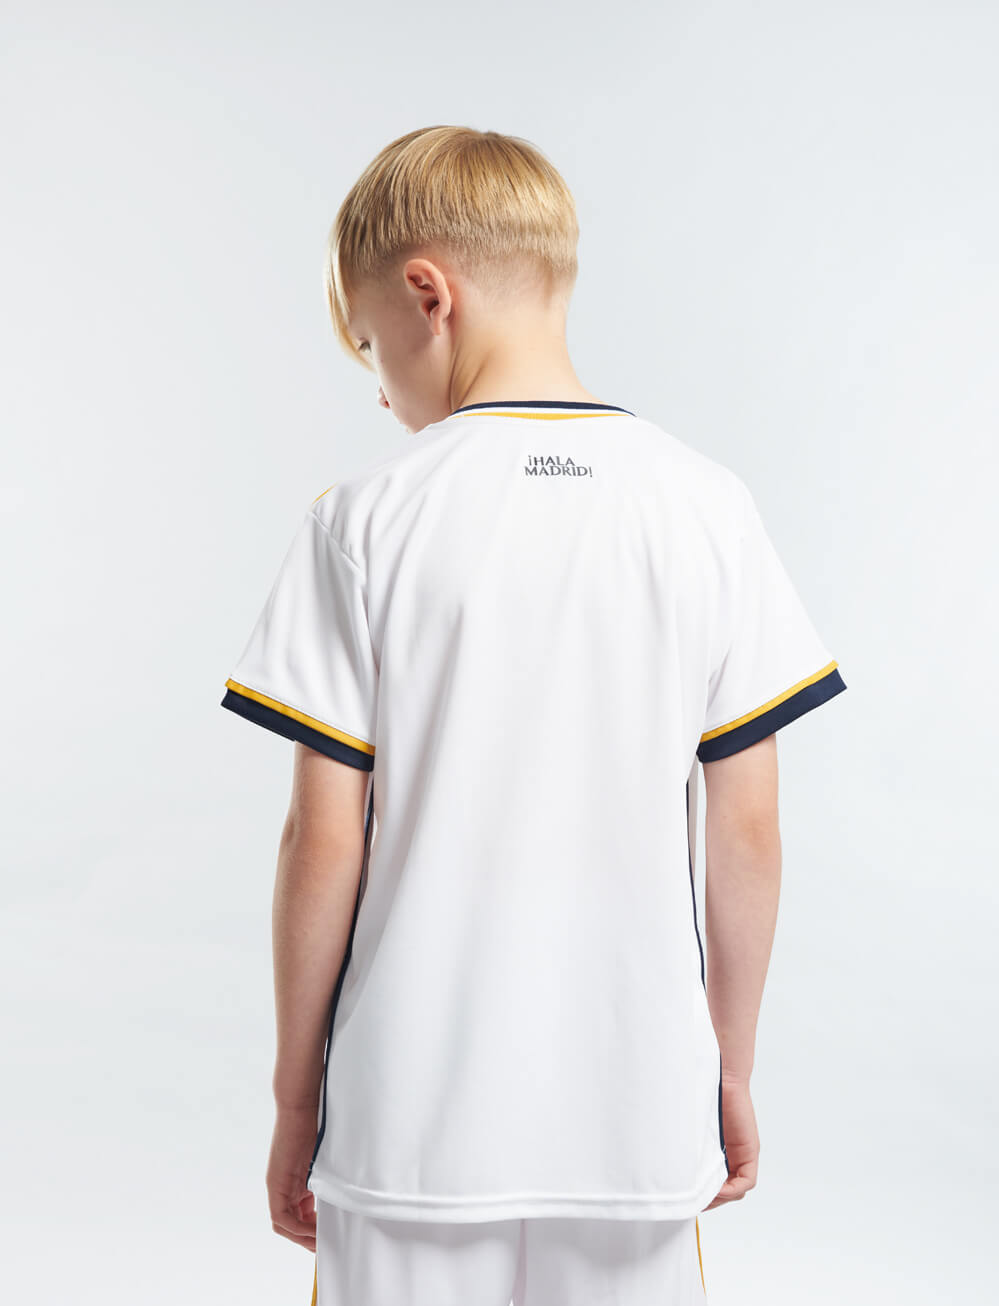 Official Real Madrid Kids Home Kit - White - The World Football Store